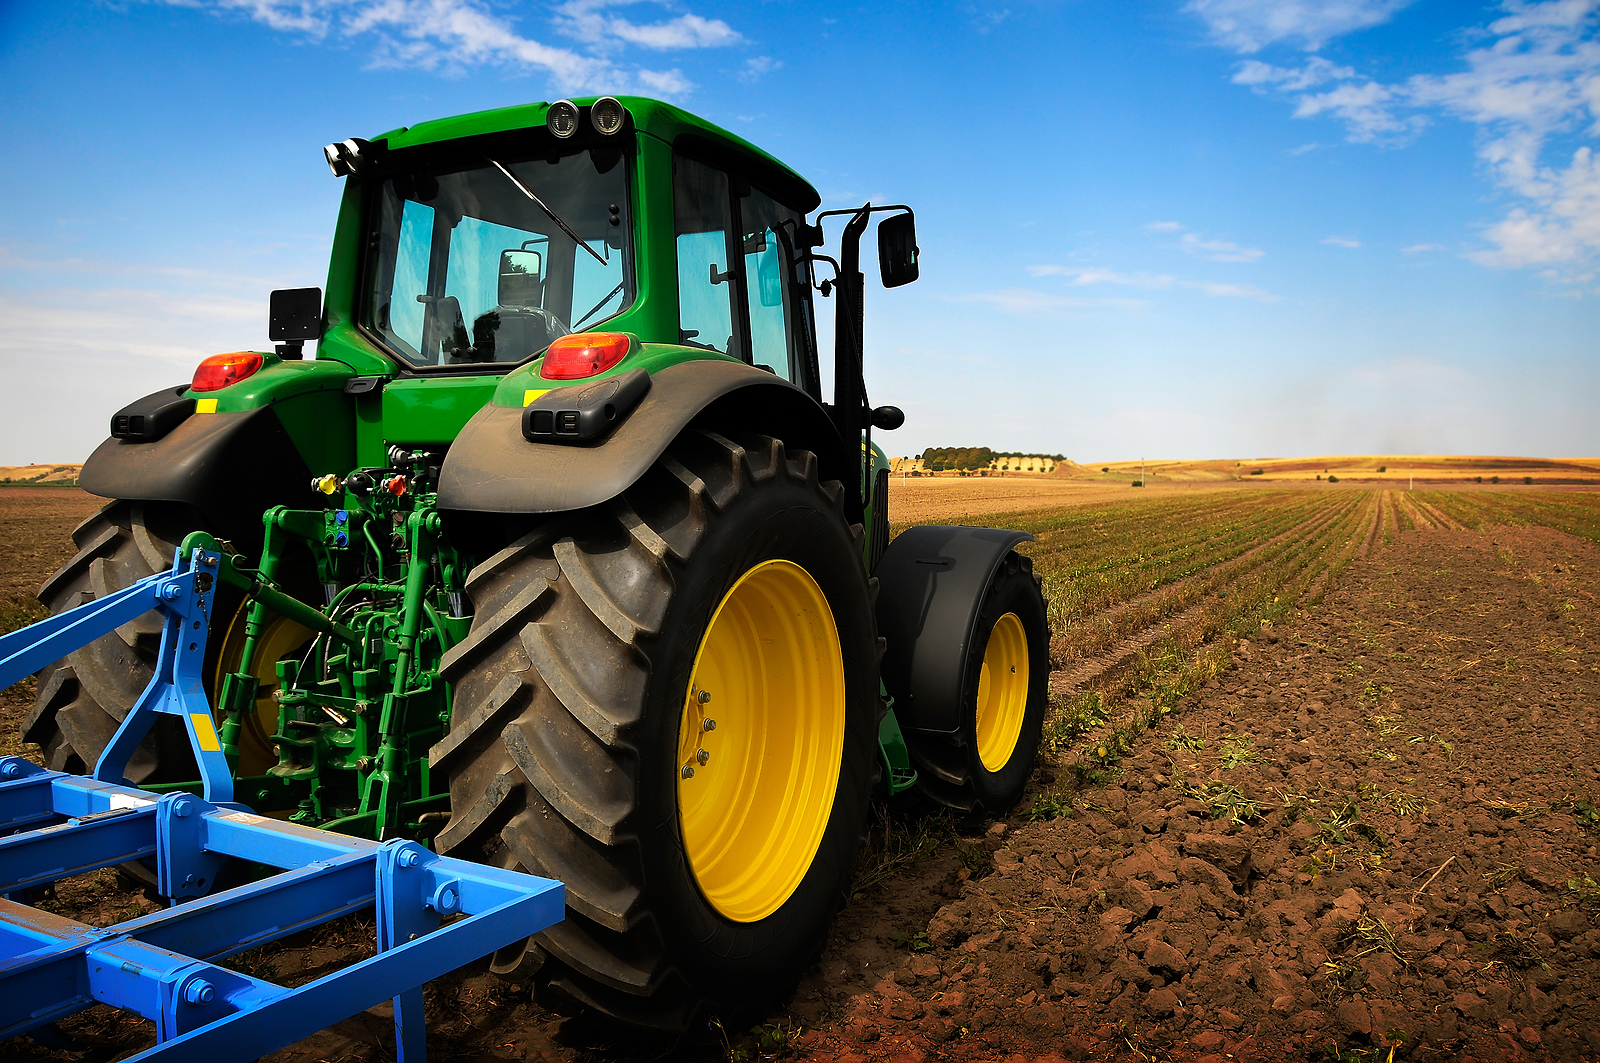 Precision farming and good information could improve operator and machine performance